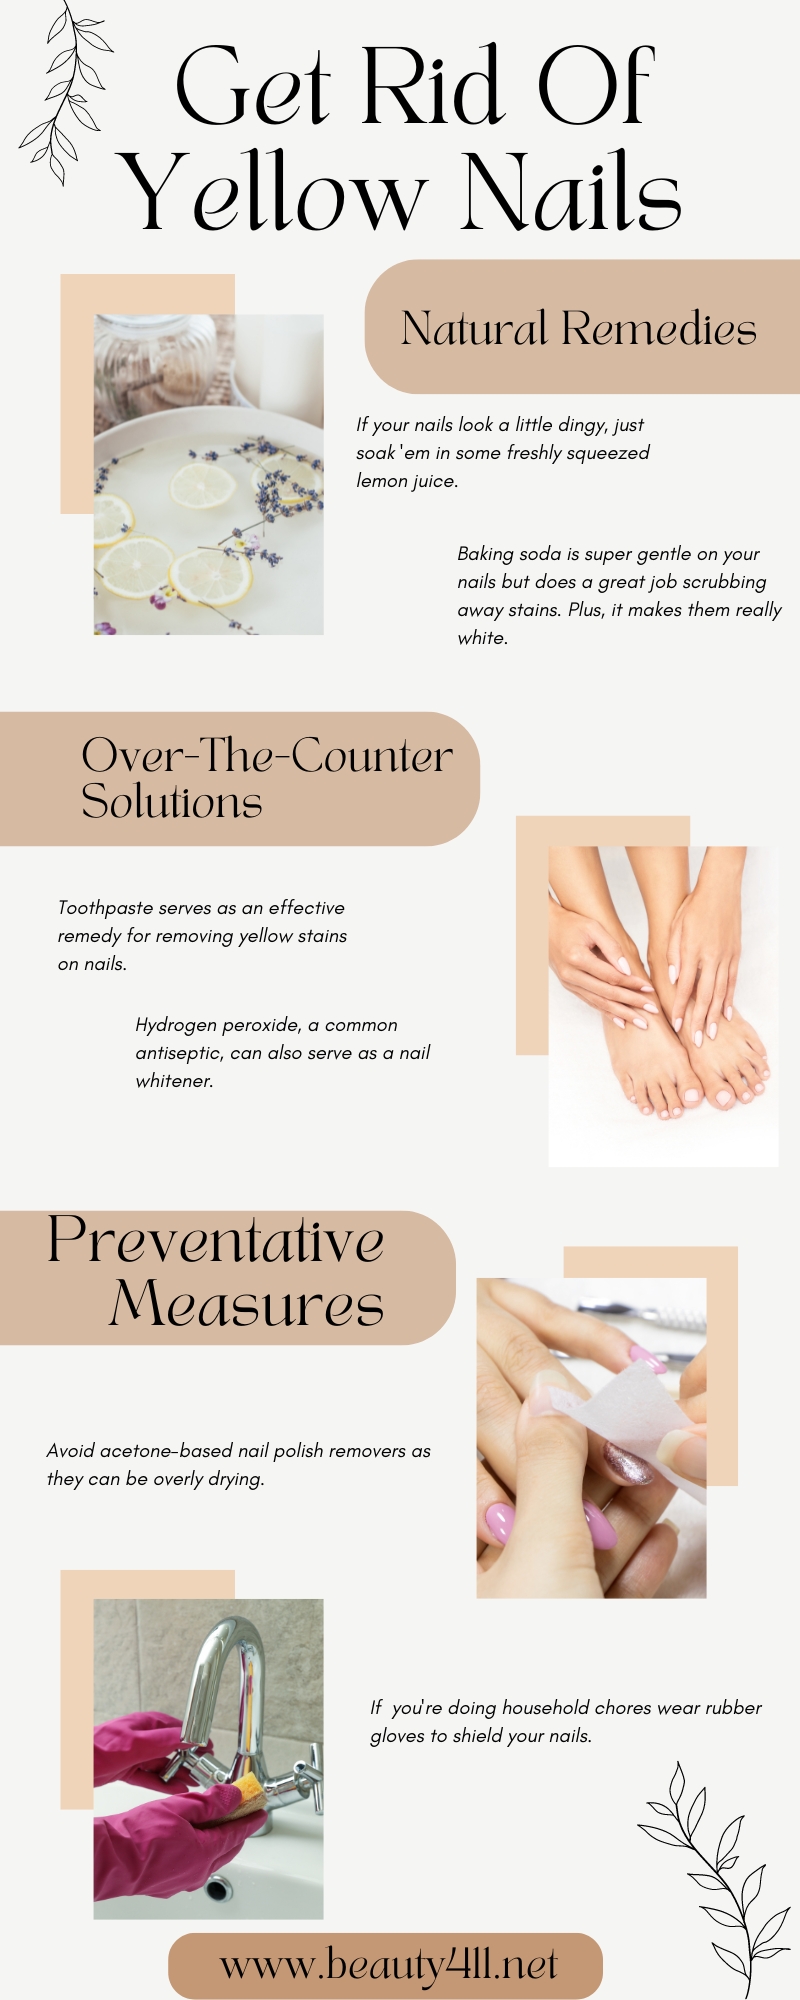 Get Rid Of Yellow Nails infographic